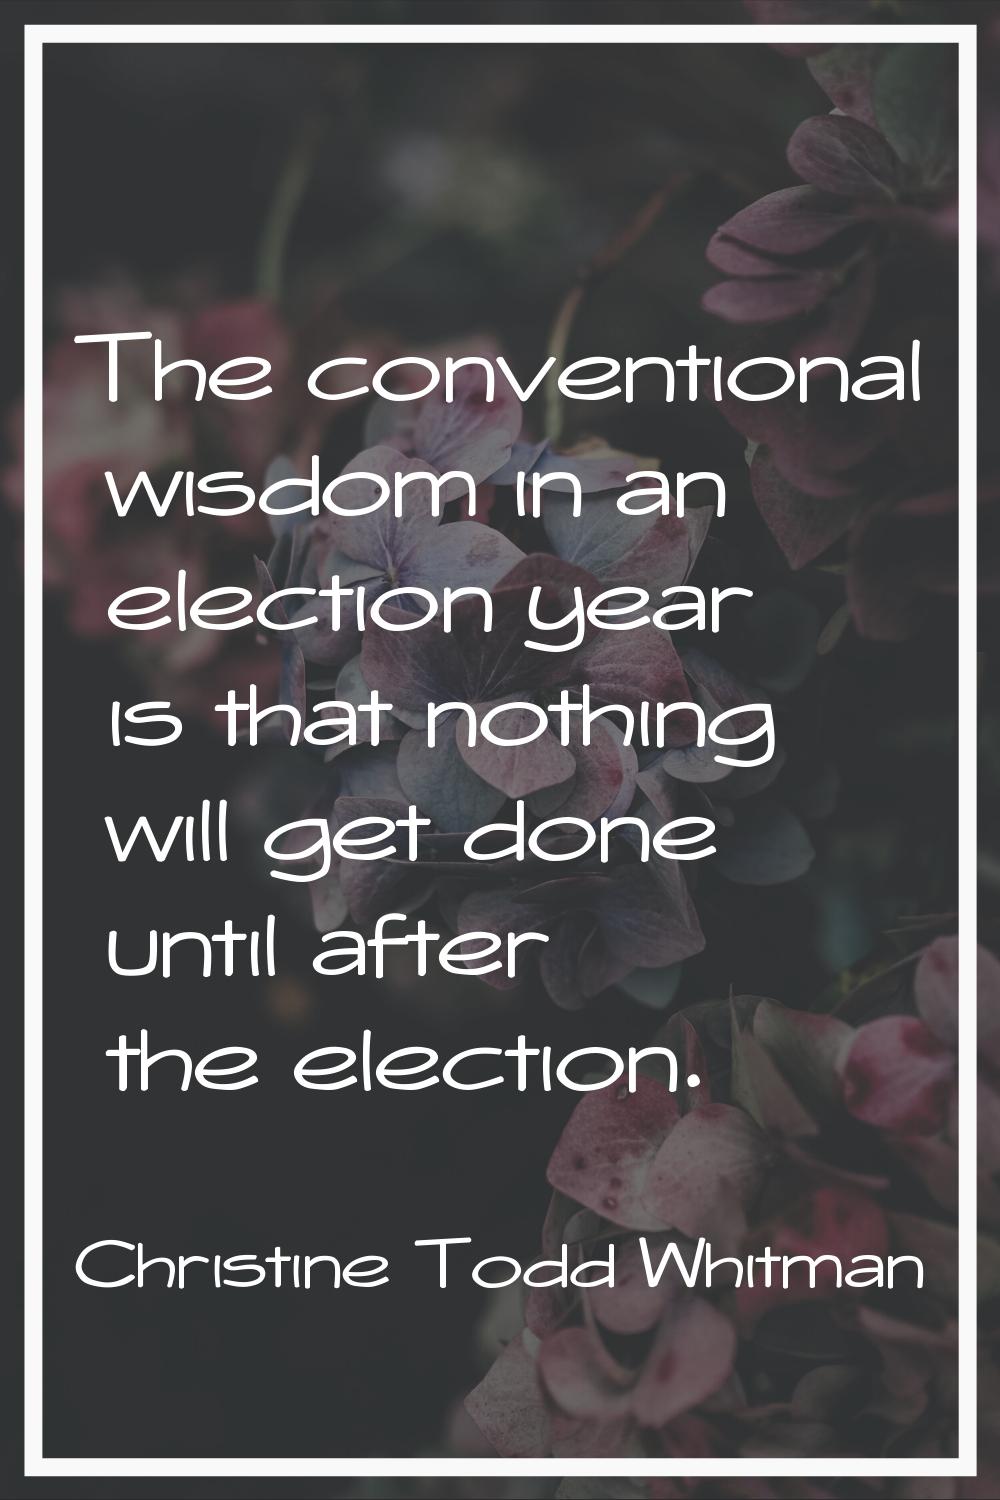 The conventional wisdom in an election year is that nothing will get done until after the election.